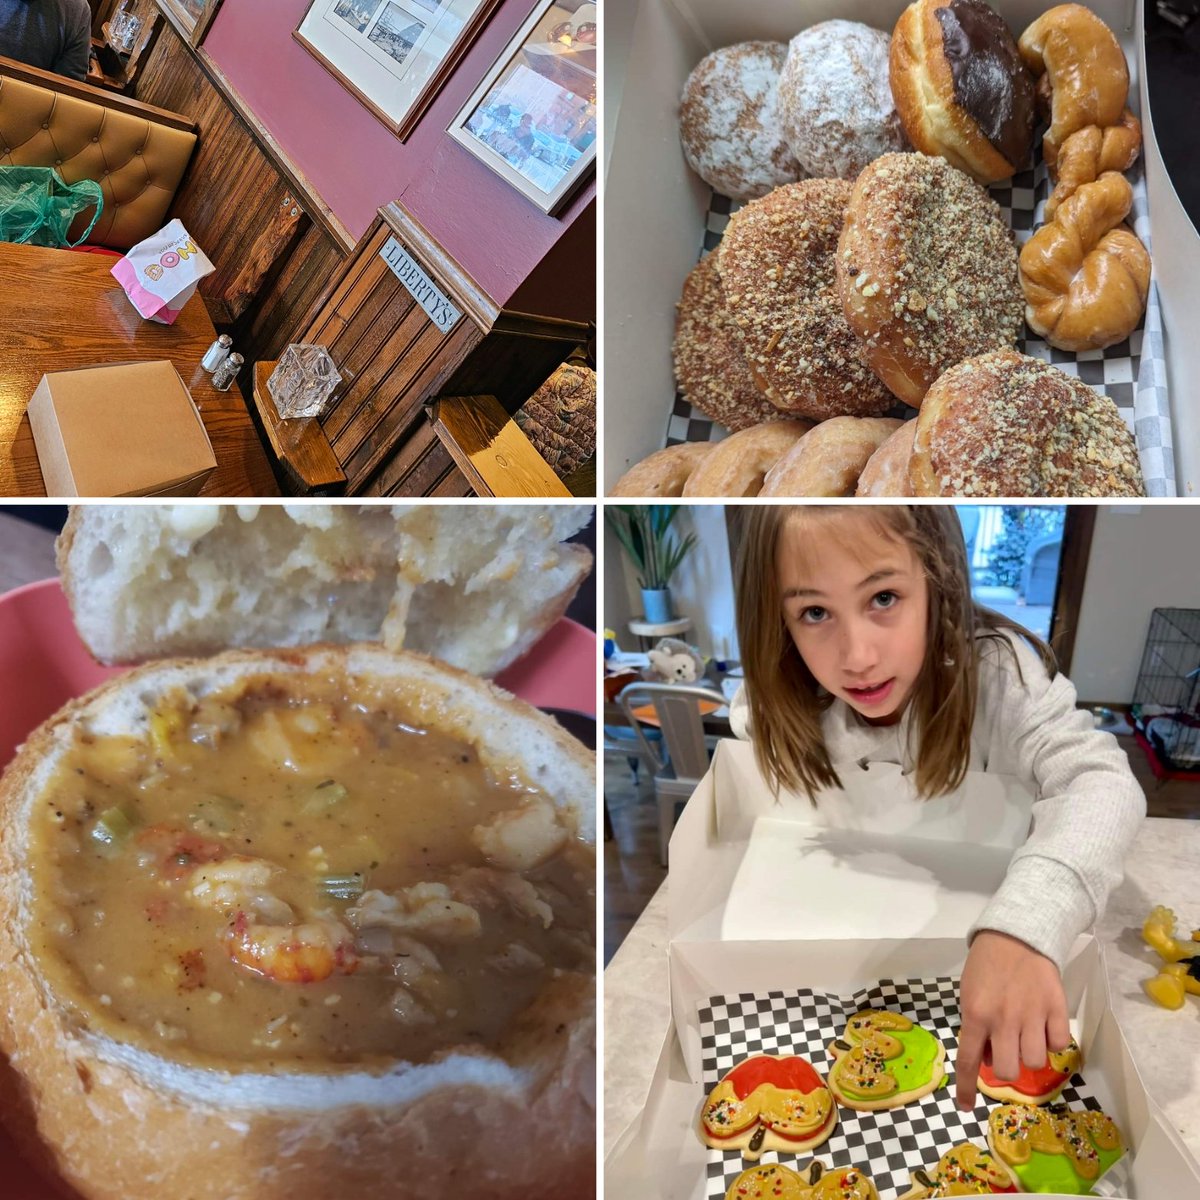 Mom, which cookie is mine? Bread Bowl Season is upon us, Boxes of Treats Start any day right, and Keeping it local while enjoying your treats @libertysrestaurant for the Arts Festival 🎨  #mnbestdonuts #mnbestbakery #bestriverroadbakery #tcltop5mnbakery #hometownpride #redwingmn